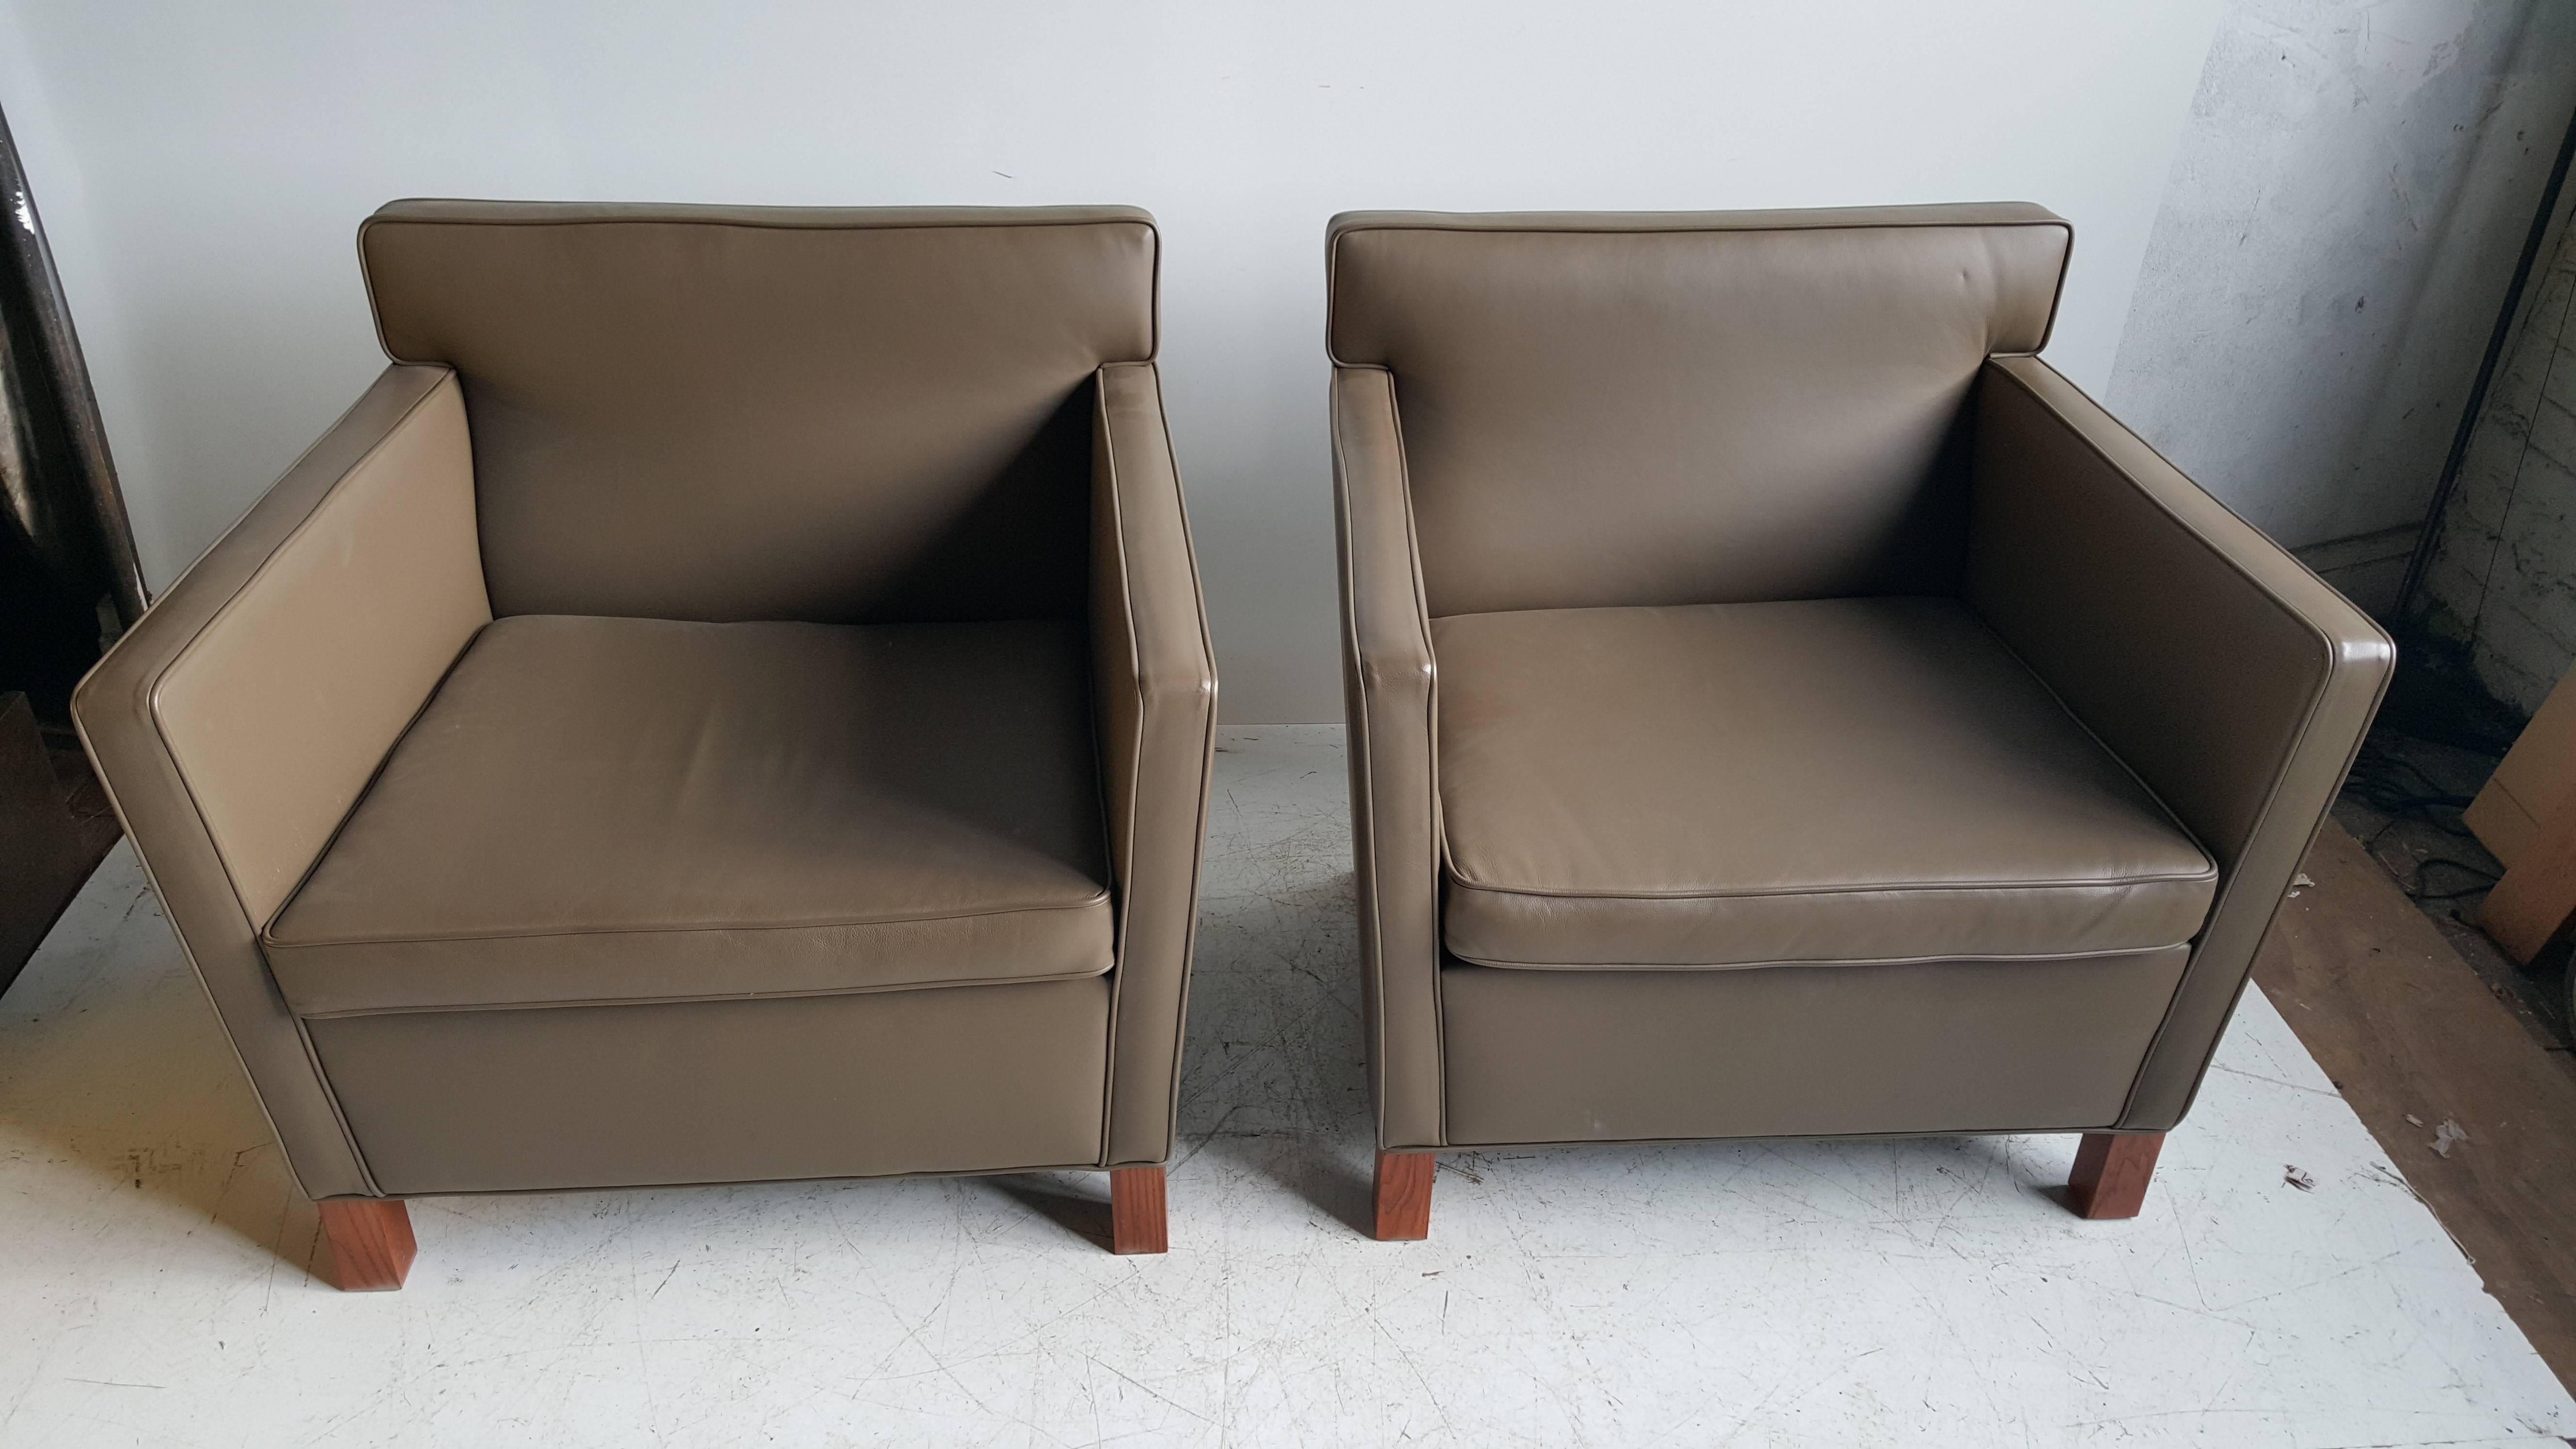 Pair of Leather Ludwig Mies van der Rohe Krefeld Lounge Chair for Knoll 1